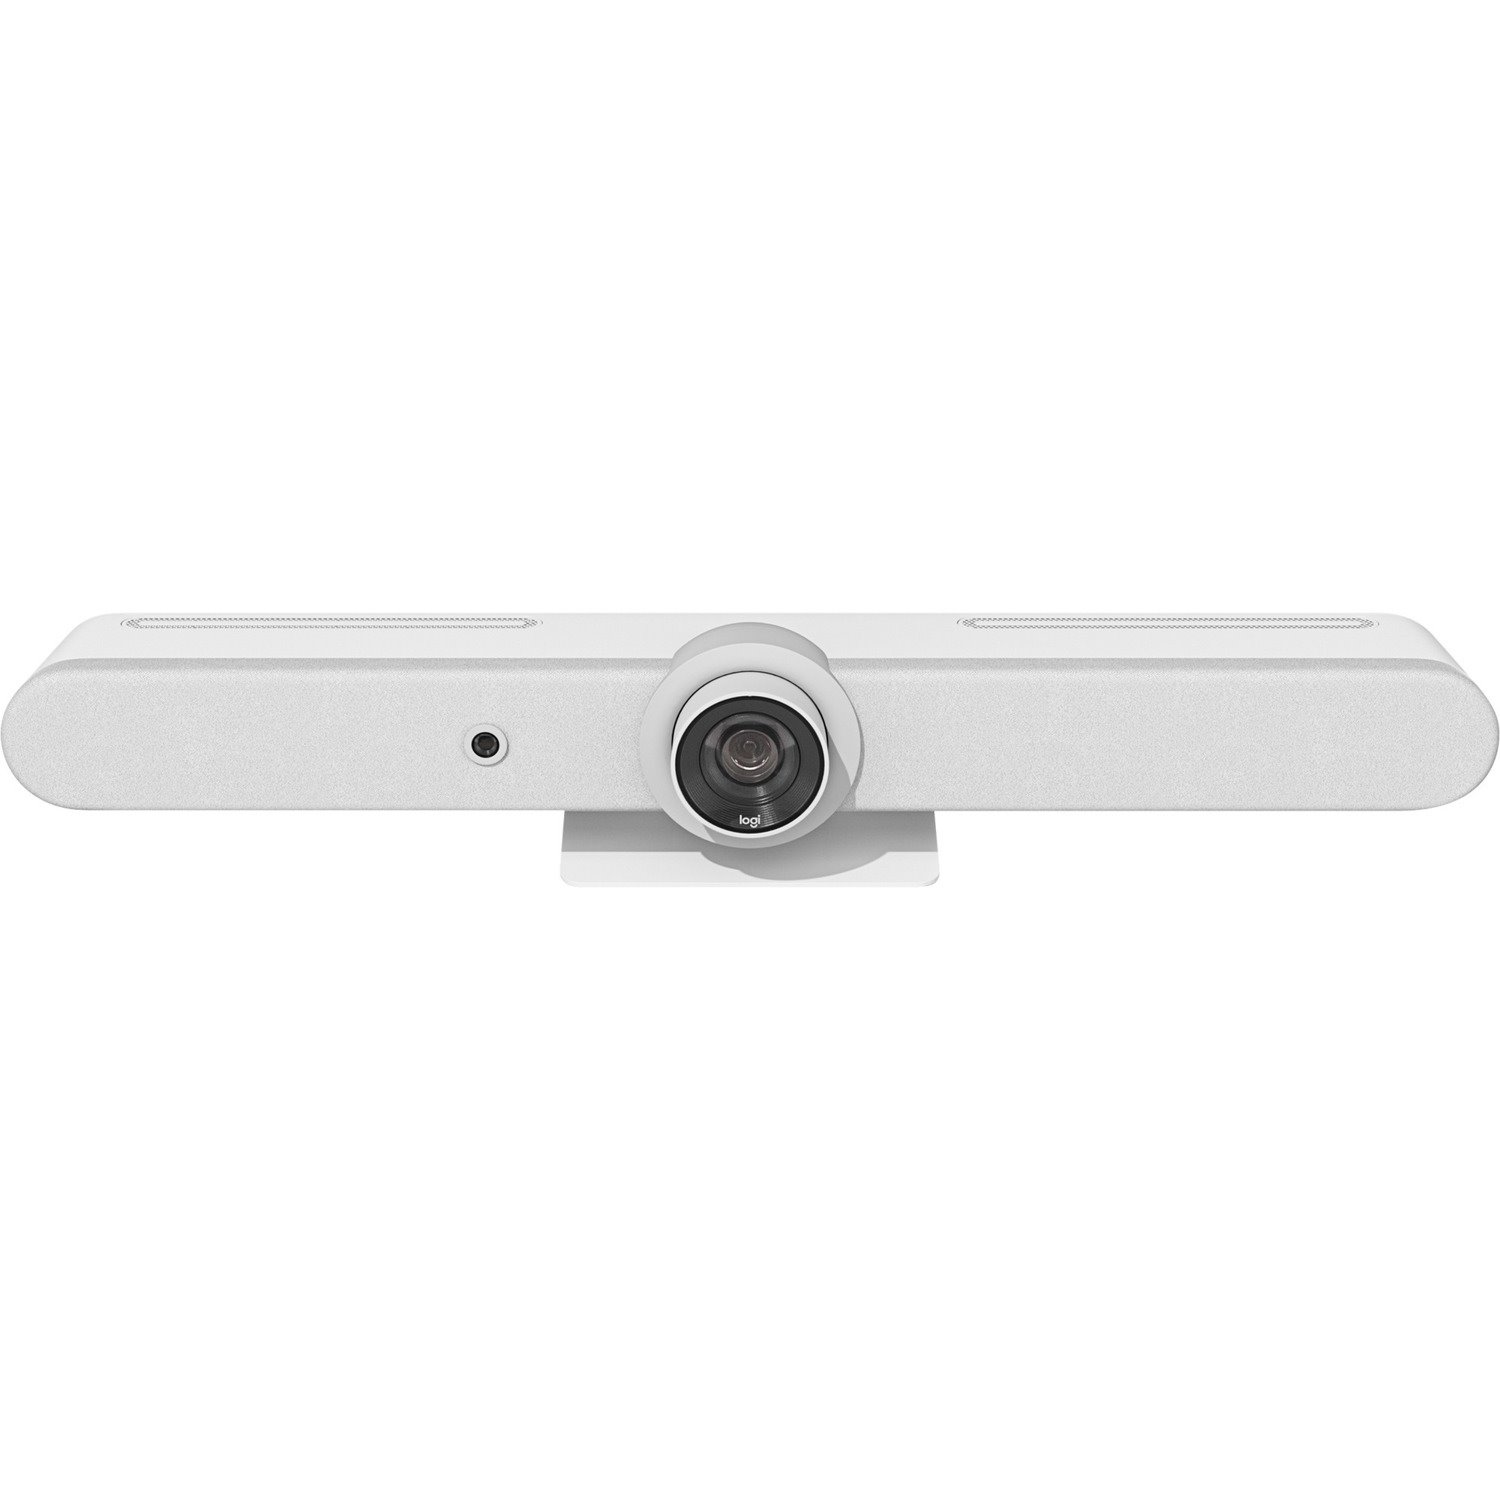 Logitech Rally Bar Video Conferencing Camera - 30 fps - White - USB 3.0